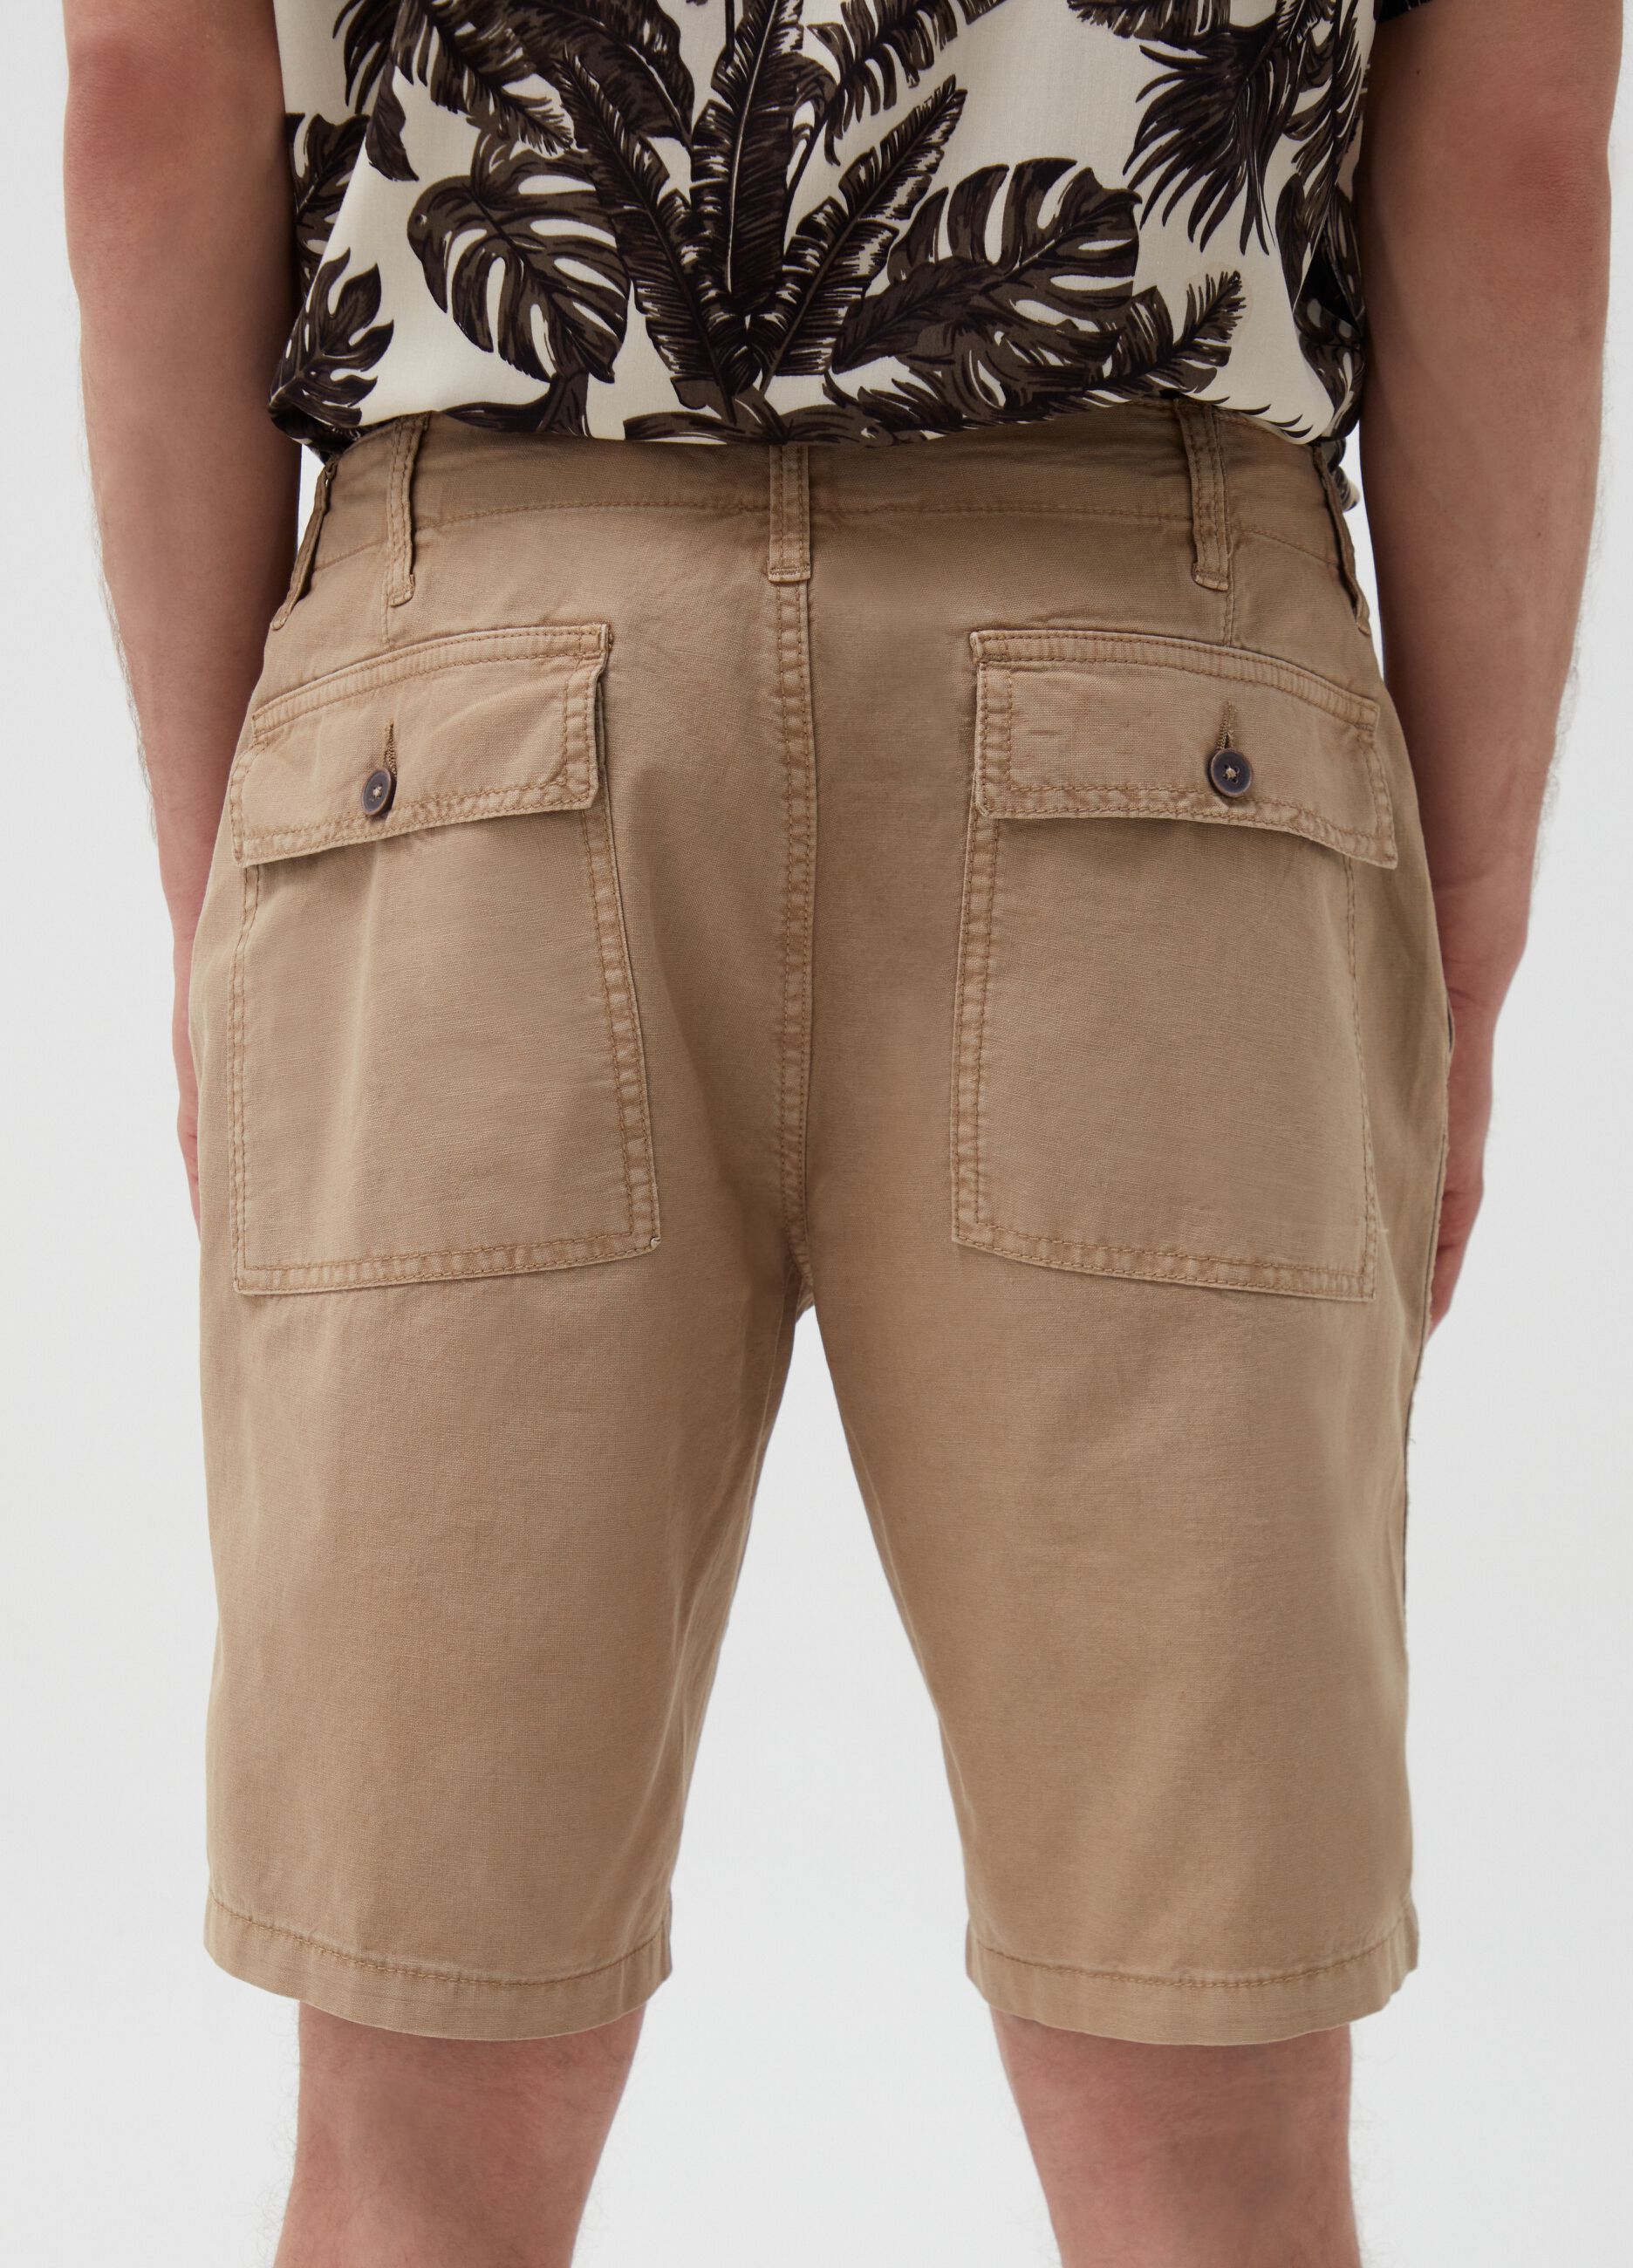 Bermuda shorts in linen and cotton with pockets